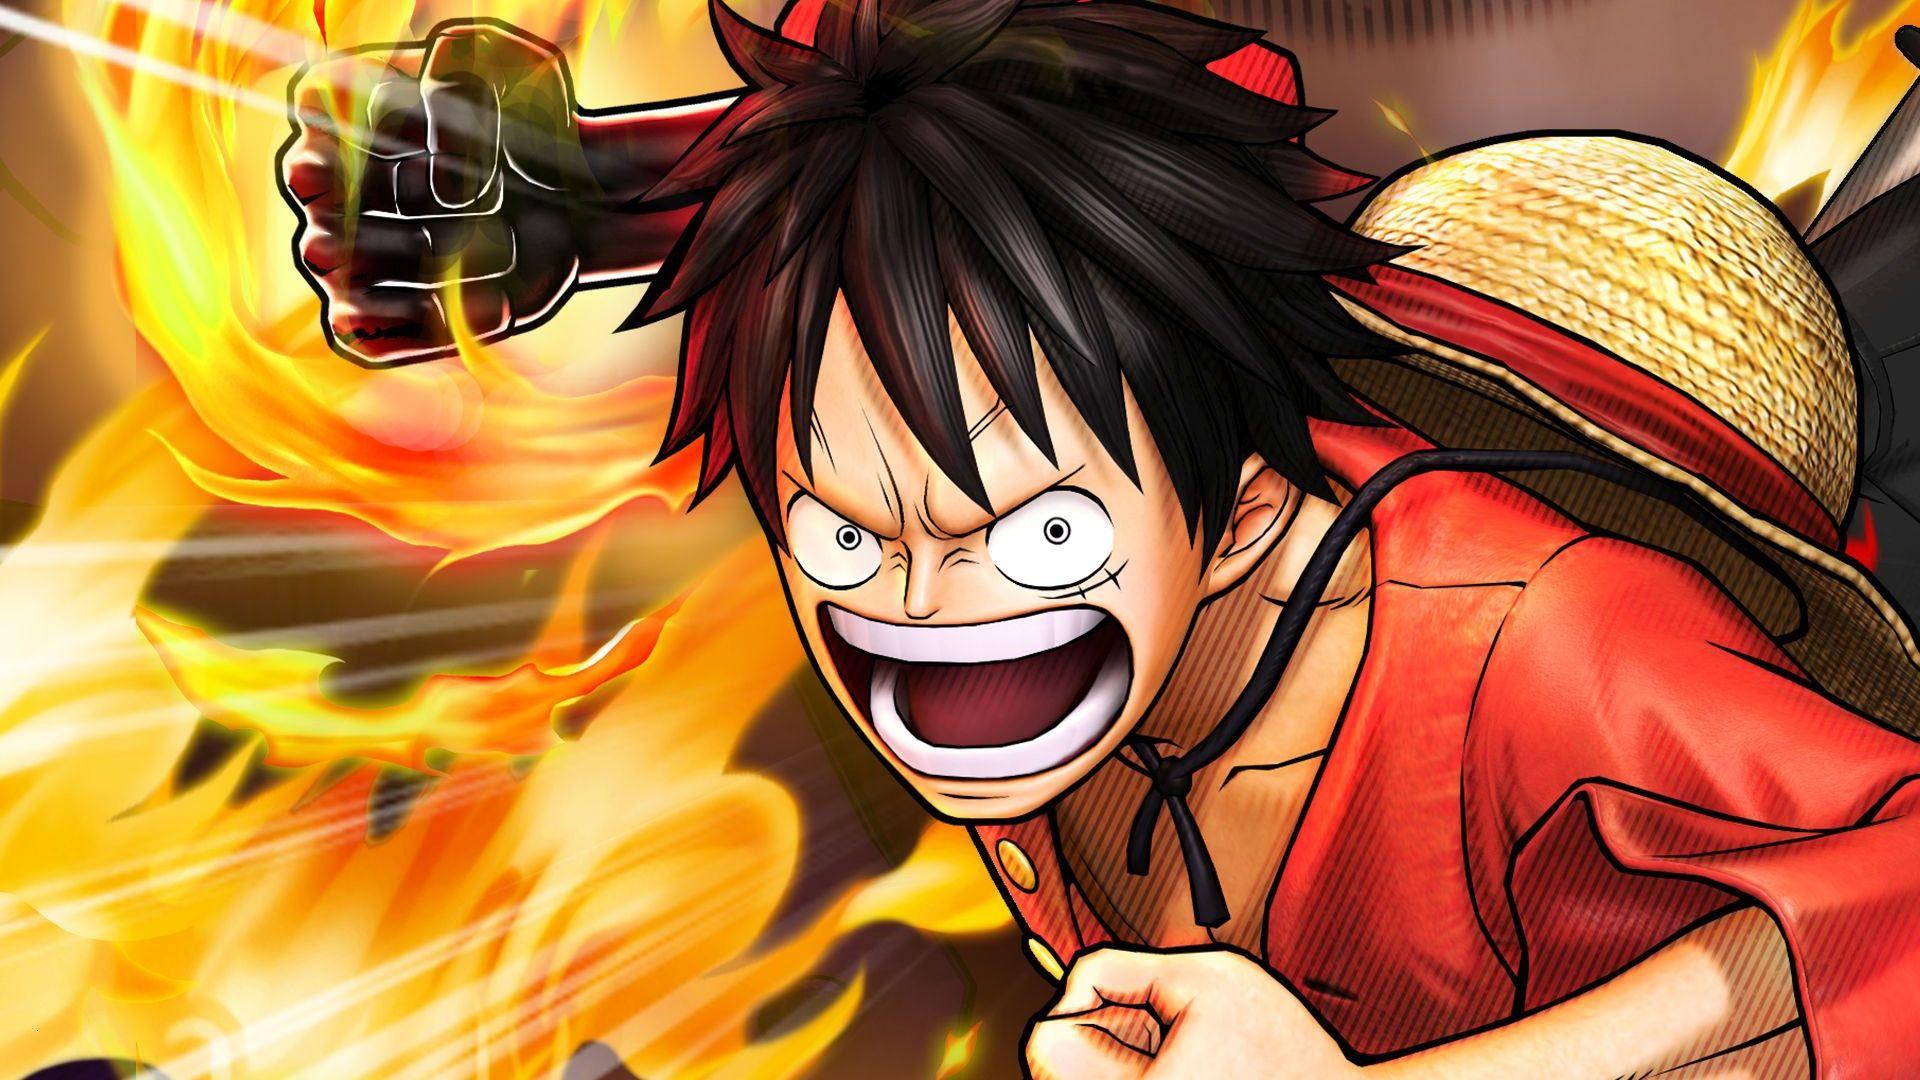 One Piece: Pirate Warriors 3 Wallpapers - Wallpaper Cave